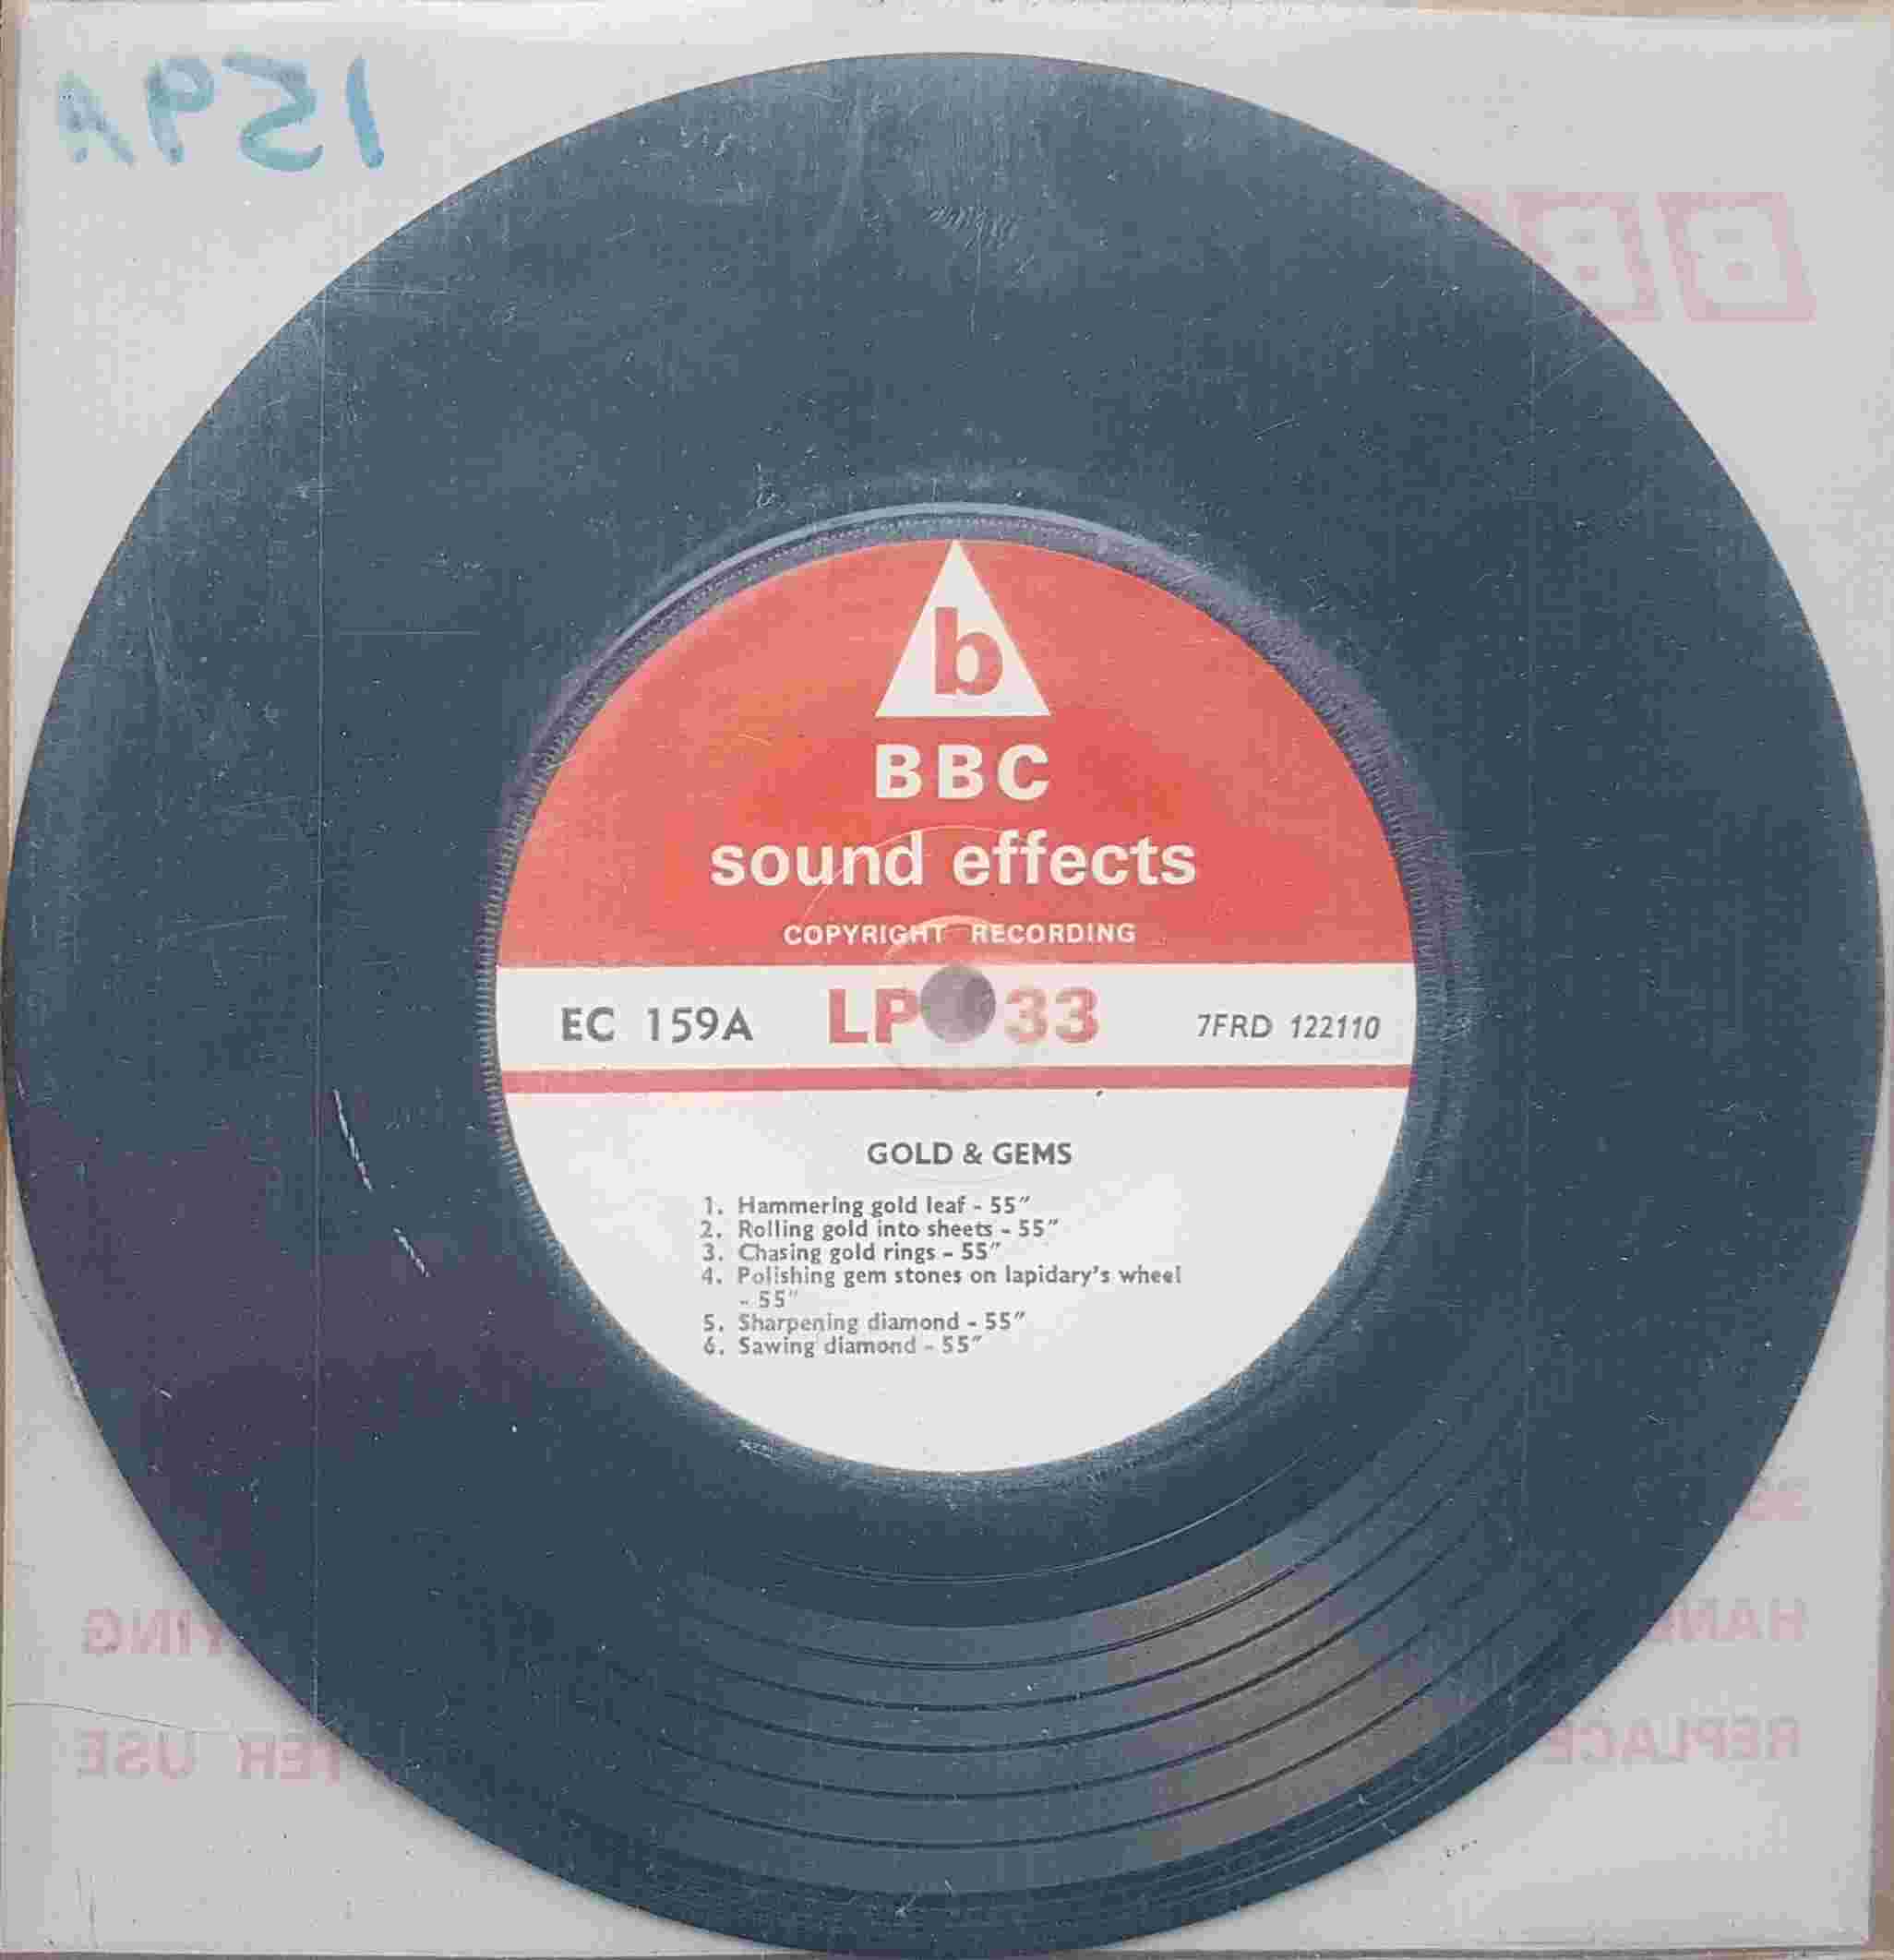 Picture of EC 159A Gold & gems by artist Not registered from the BBC records and Tapes library